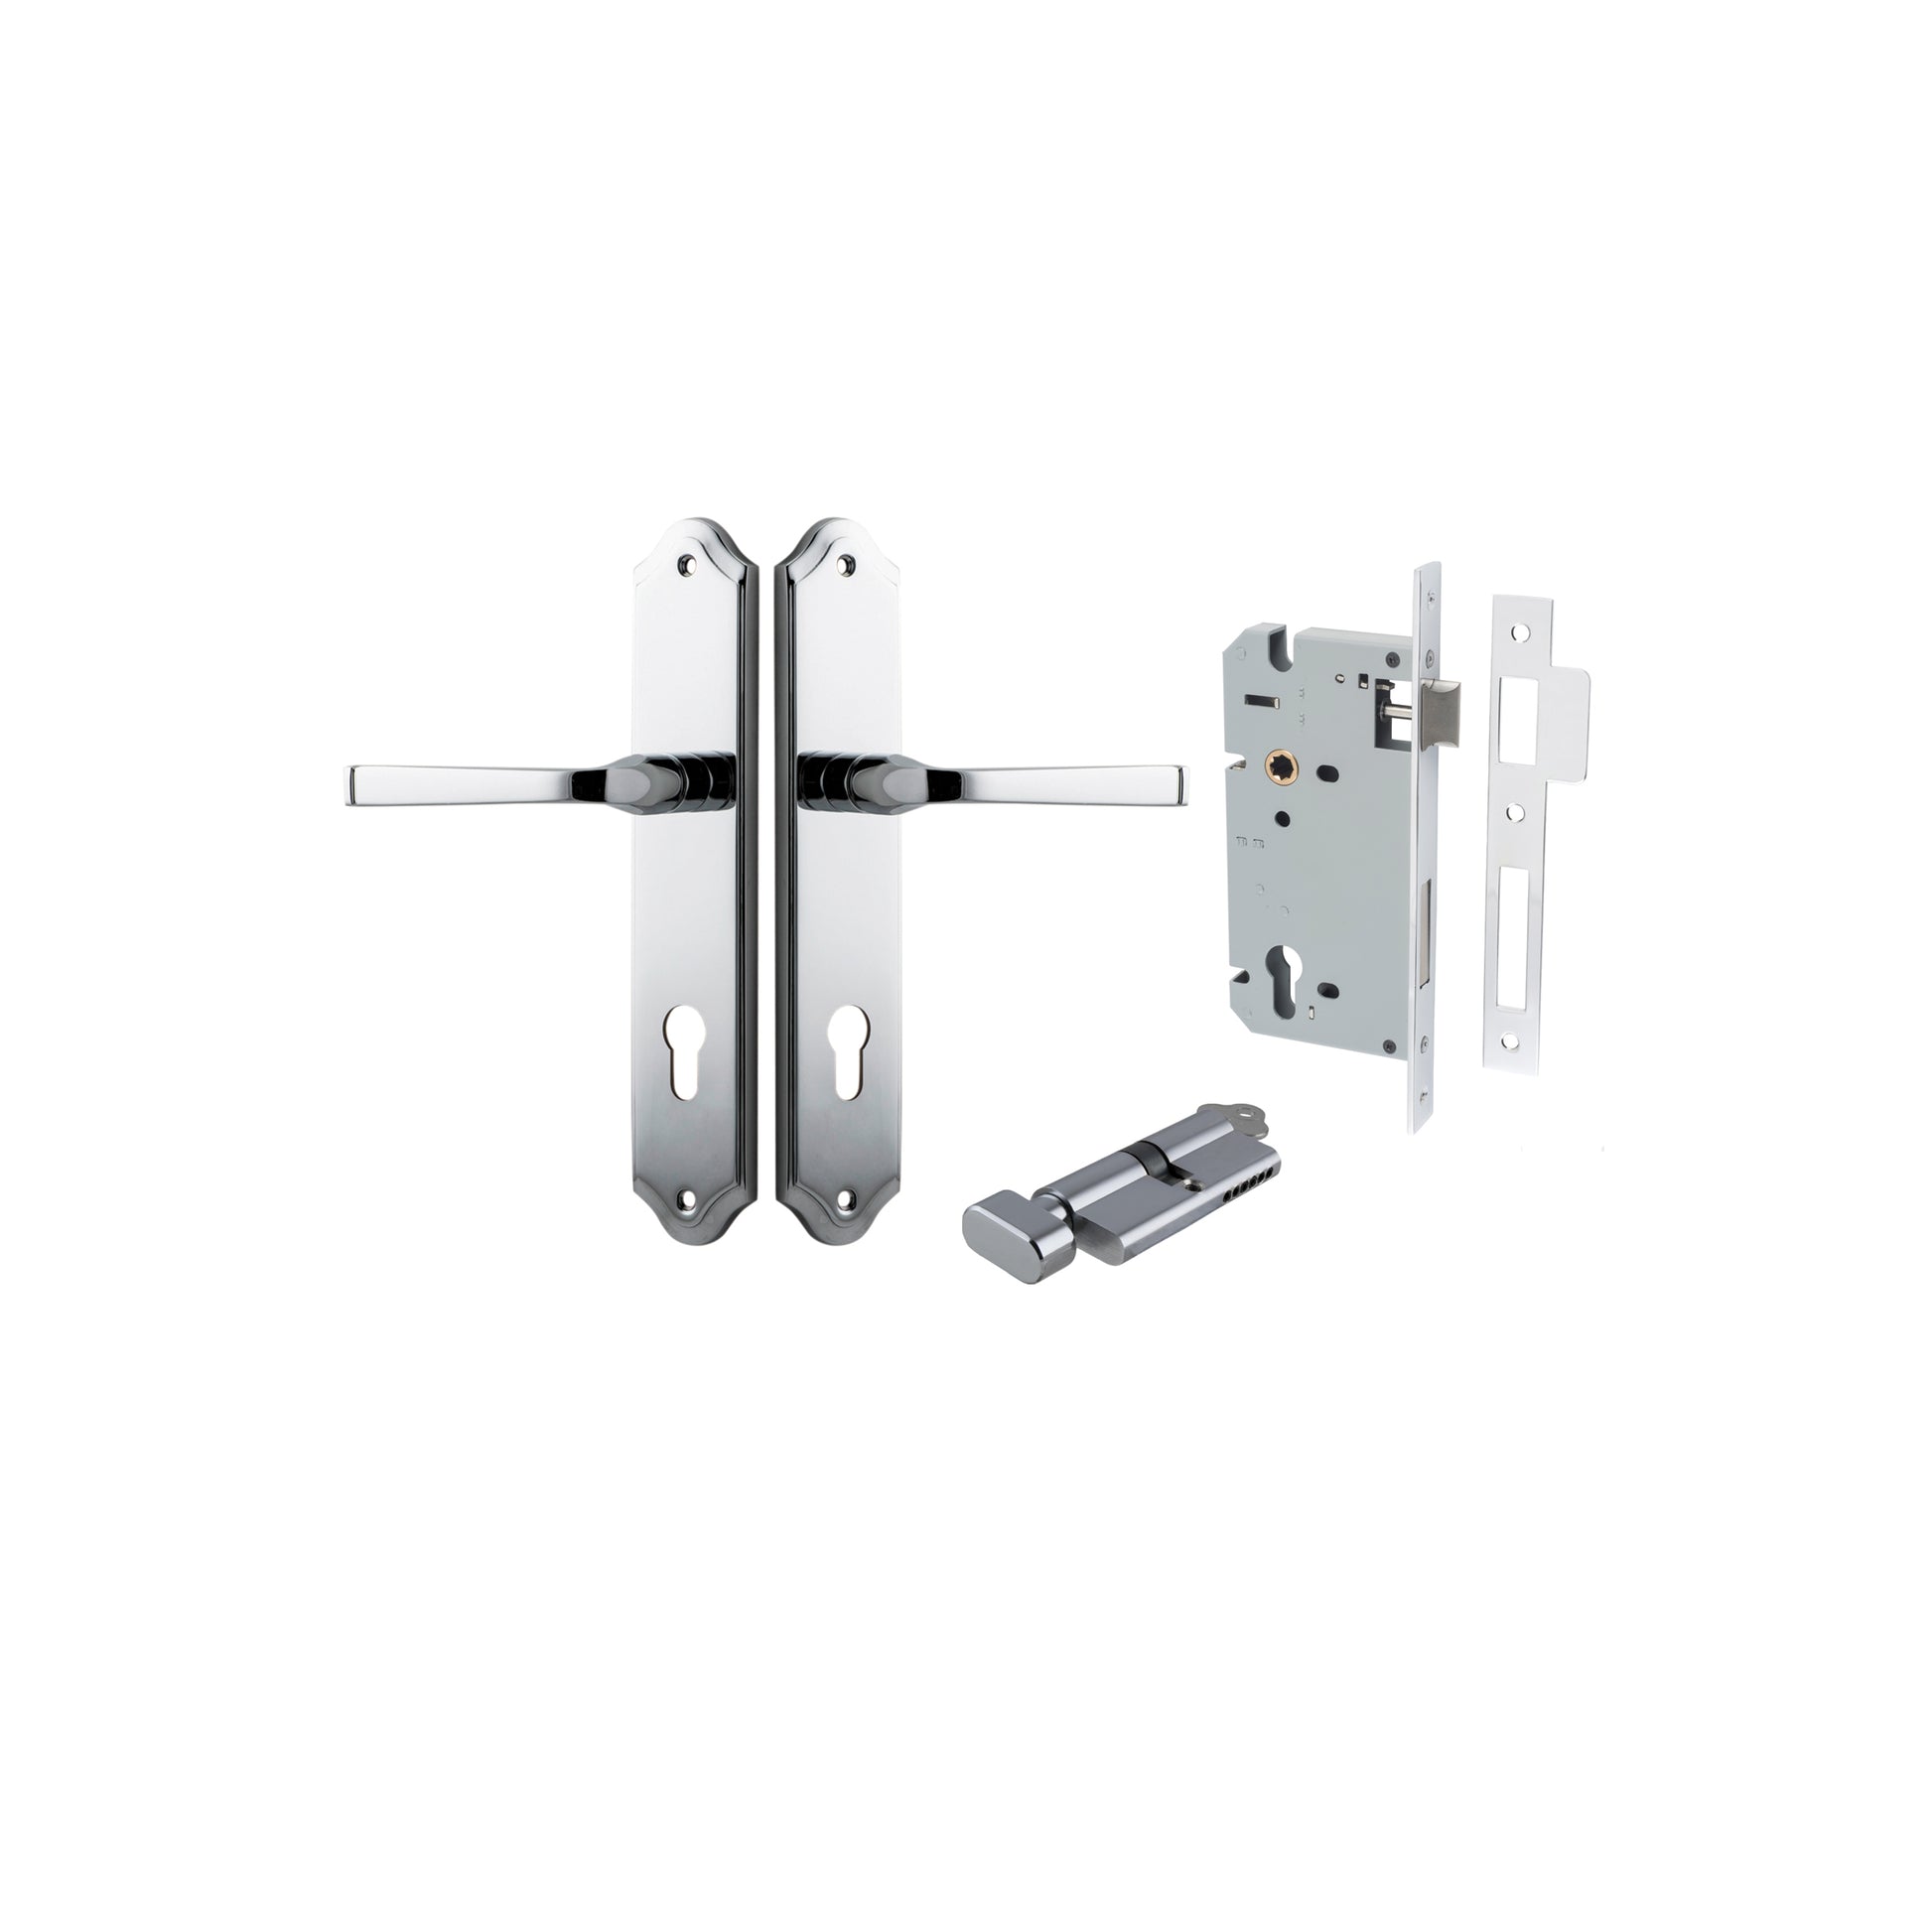 Door Lever Annecy Shouldered Euro Polished Chrome CTC85mm H240xW50xP65mm Entrance Kit, Mortice Lock Euro Polished Chrome CTC85mm Backset 60mm, Euro Cylinder Key Thumb 6 Pin Polished Chrome L70mm KA1 in Polished Chrome